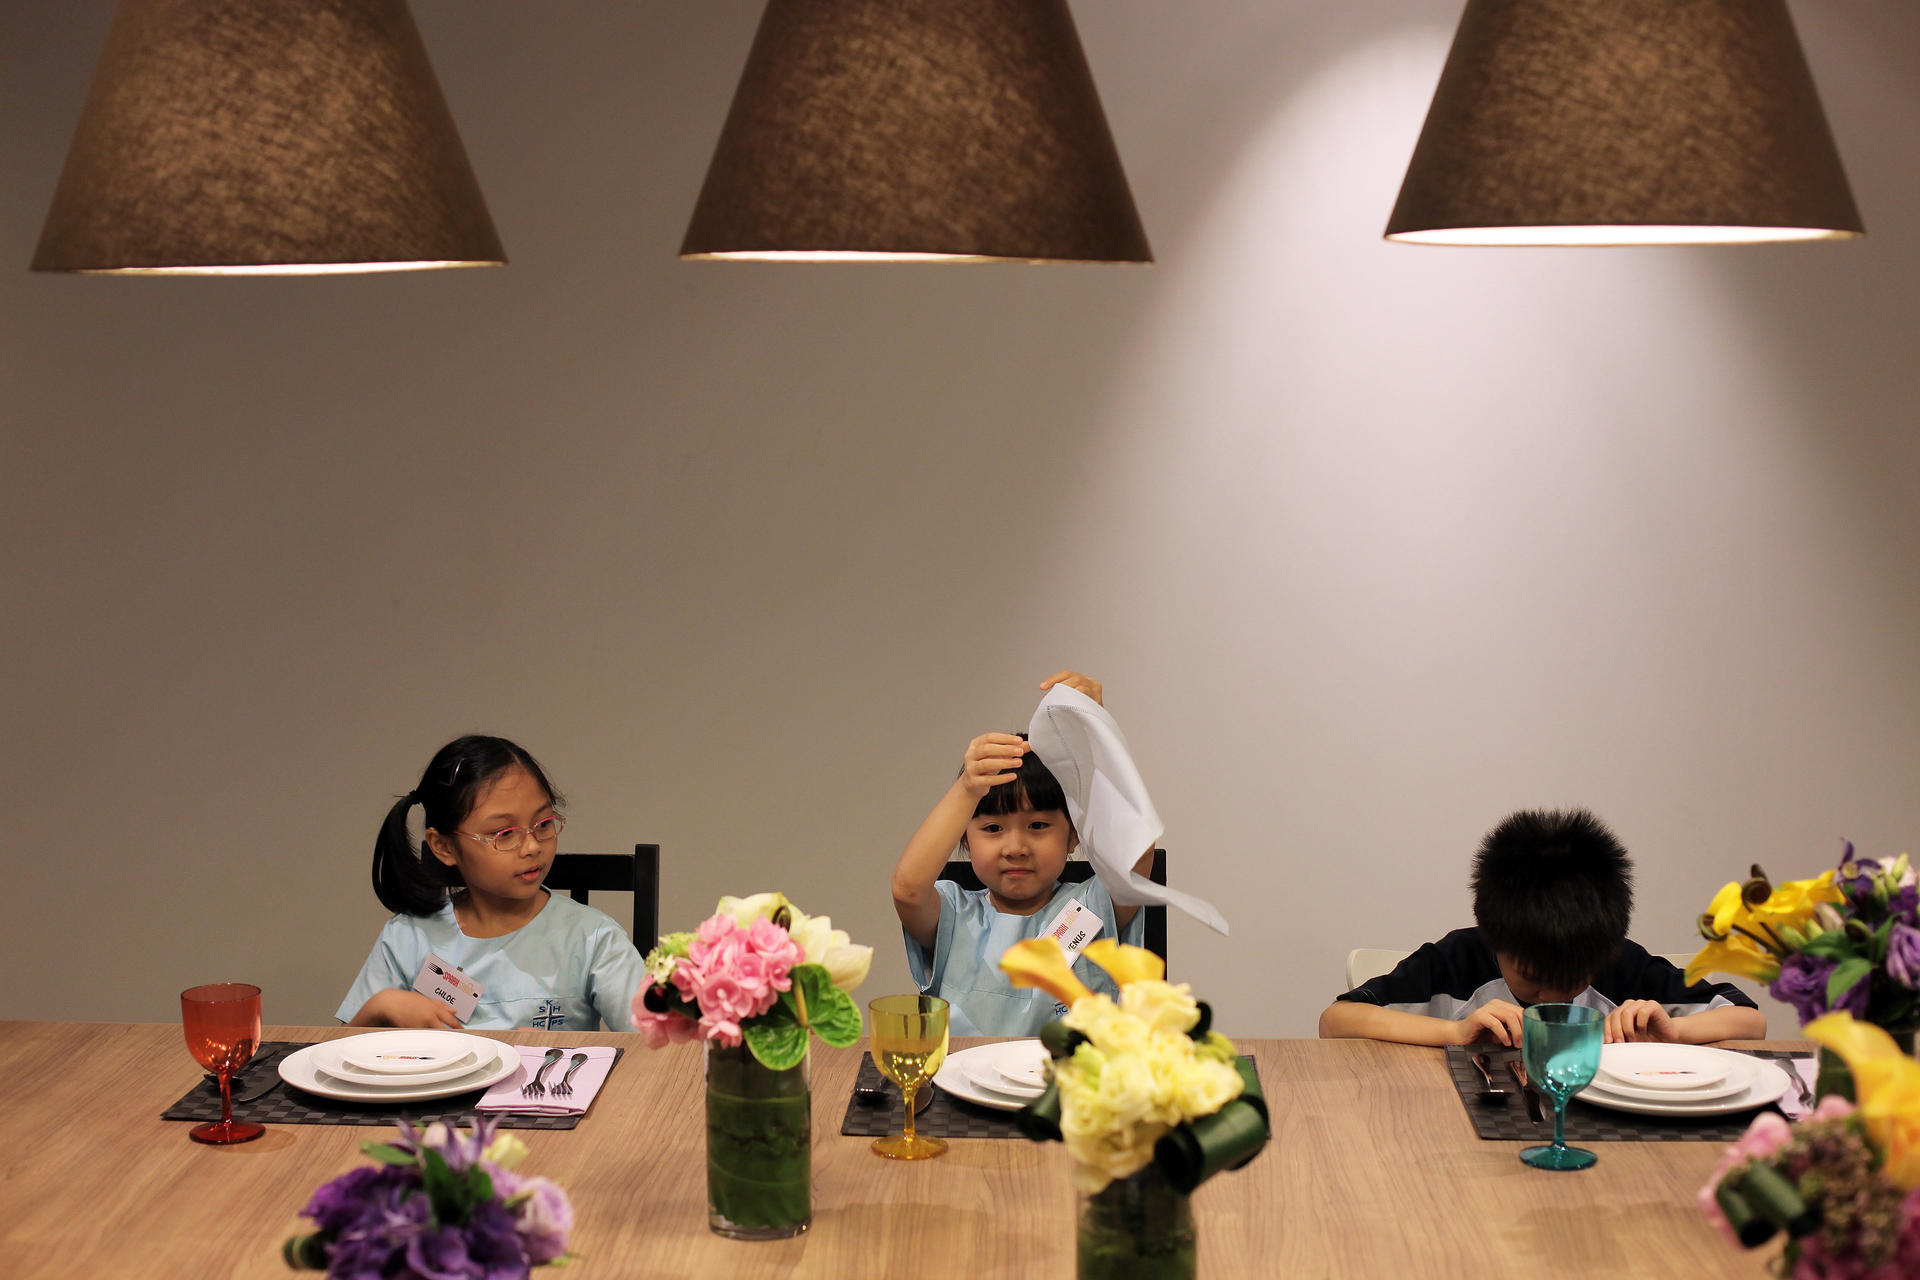 Children learn table etiquette and cooking skills at Spark Studios, founded by Yoshiko Hariu. Photo: SCMP